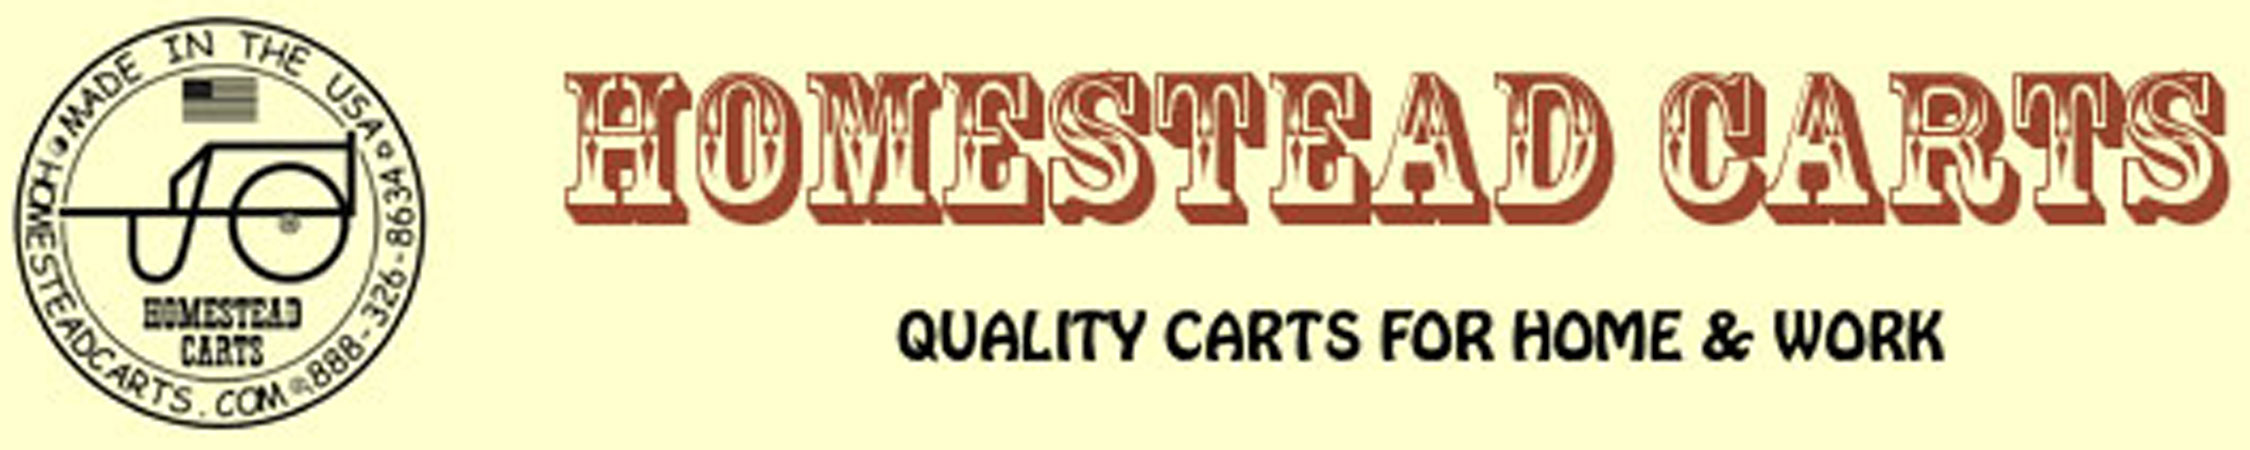 Homestead Carts Home Page